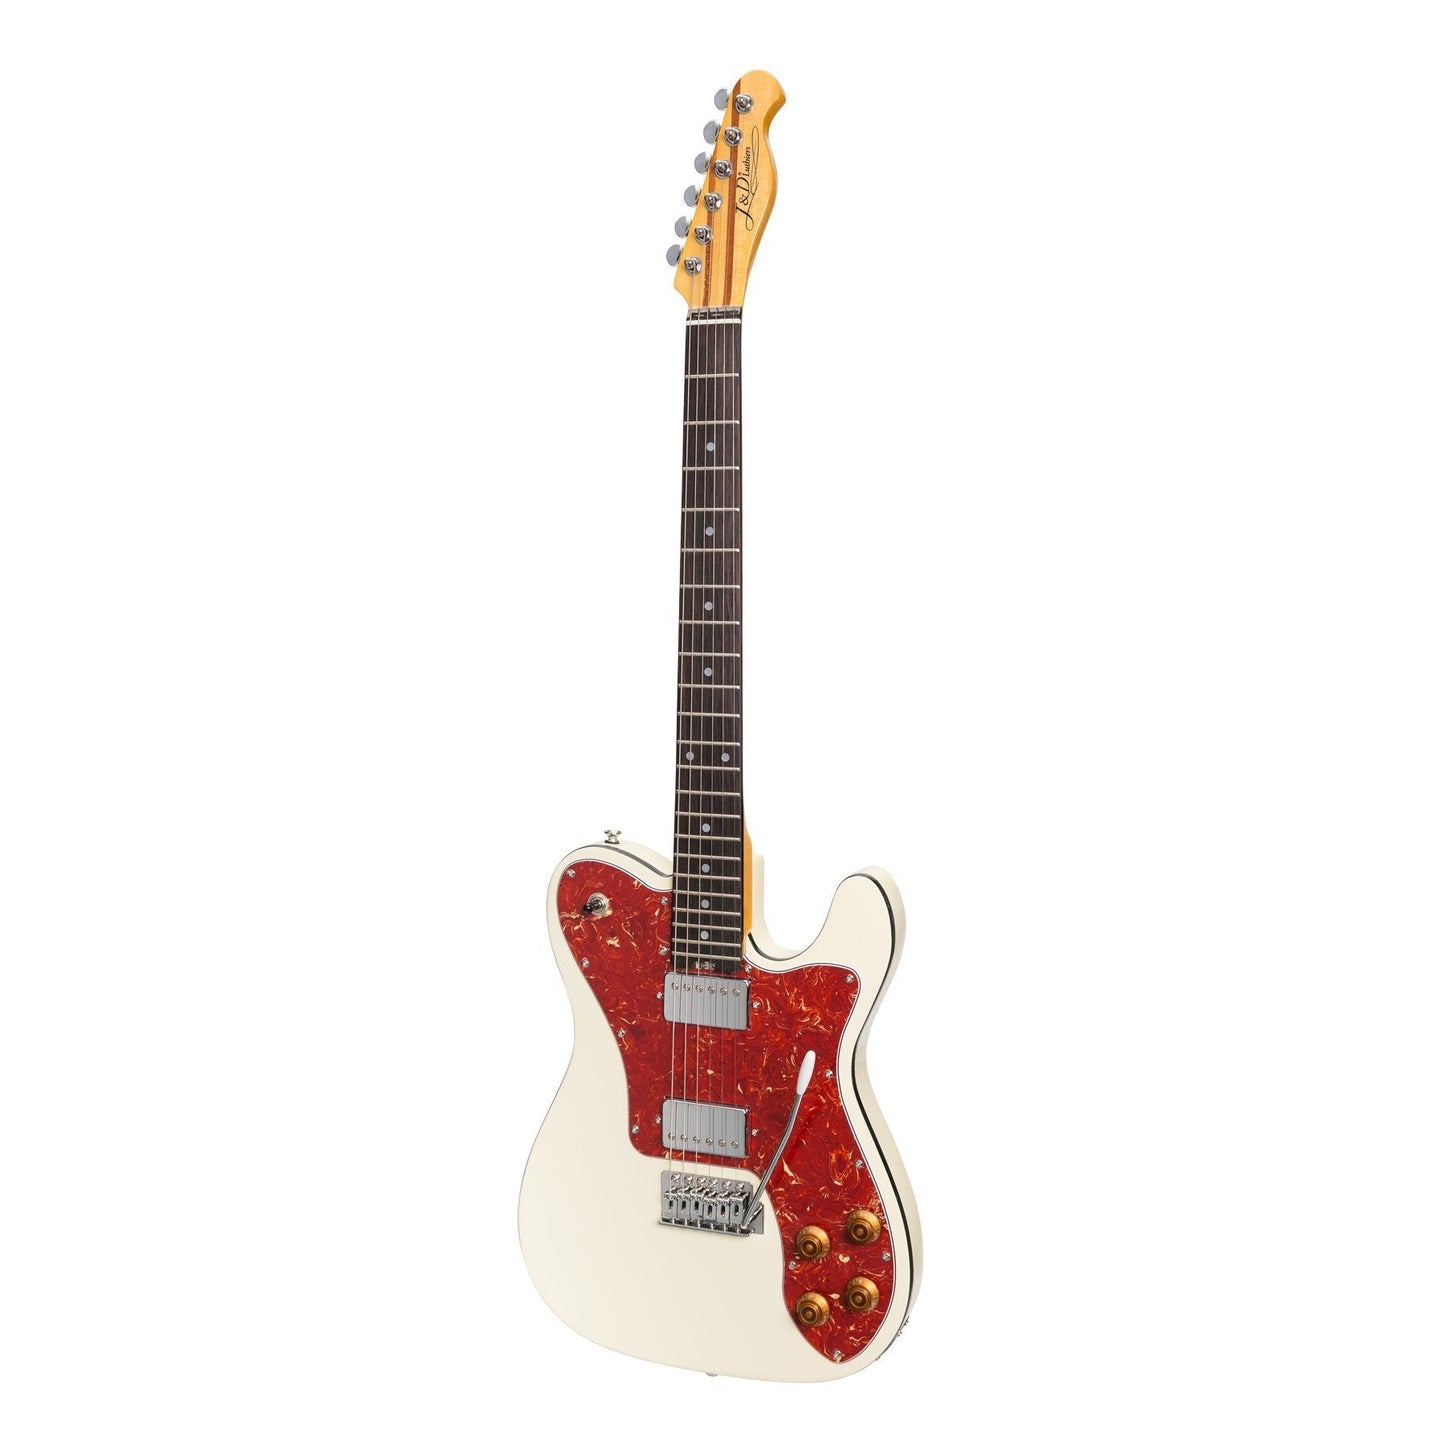 J&D Luthiers Deluxe TE-Style Electric Guitar (Ivory)